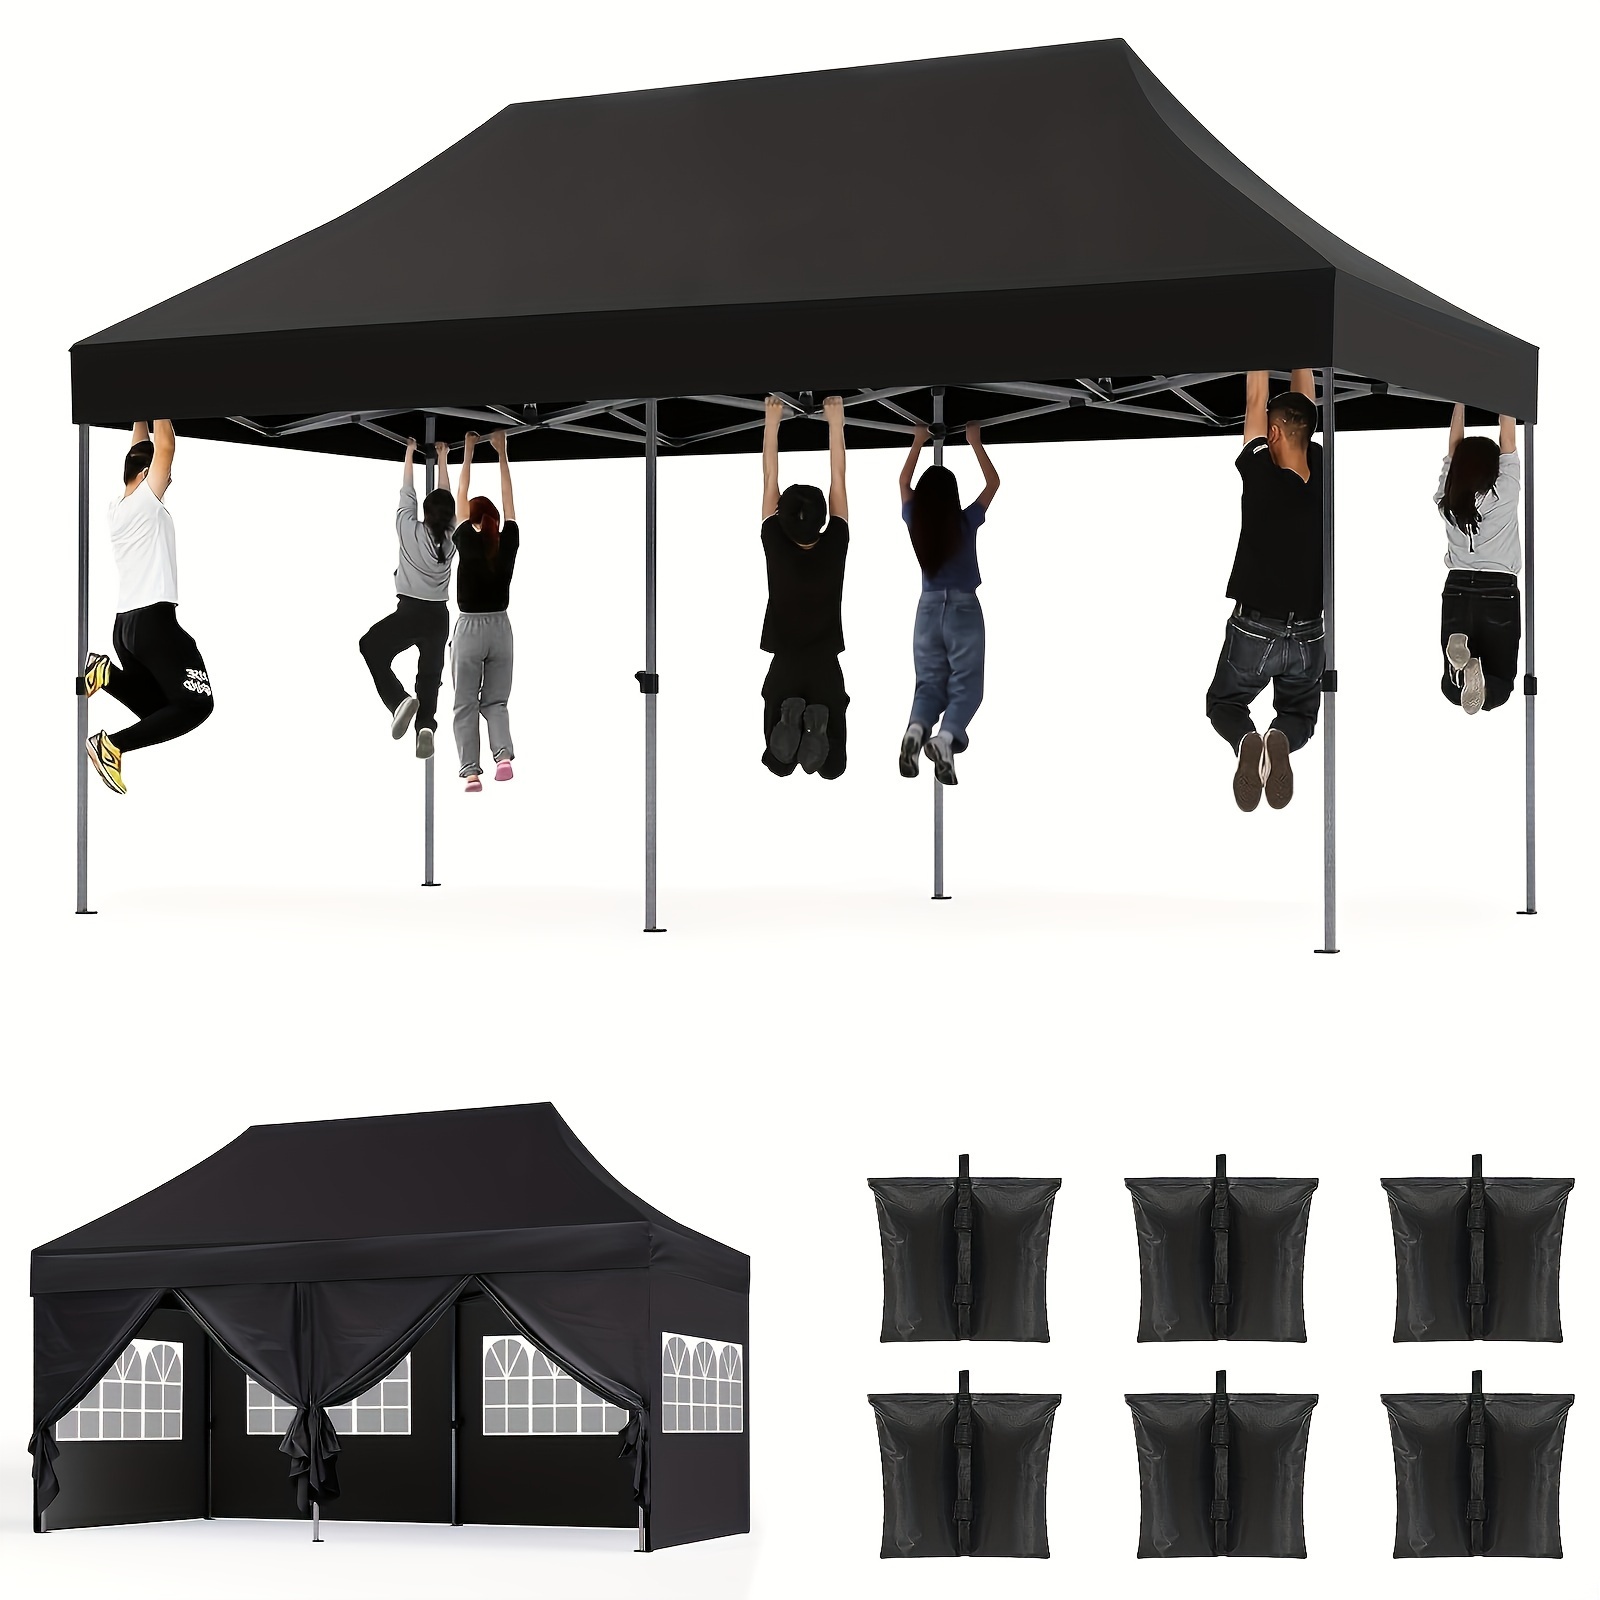 

10x20 Ft Heavy Duty Pop Up Canopy, 10x20 Canopy Tent Sidewalls Made Of 420d Oxford Fabric, Instant Shade Canopy Tent For Parties Beach Outdoor, Roller Bag, And 6 Weight Bags (black/white/grey)